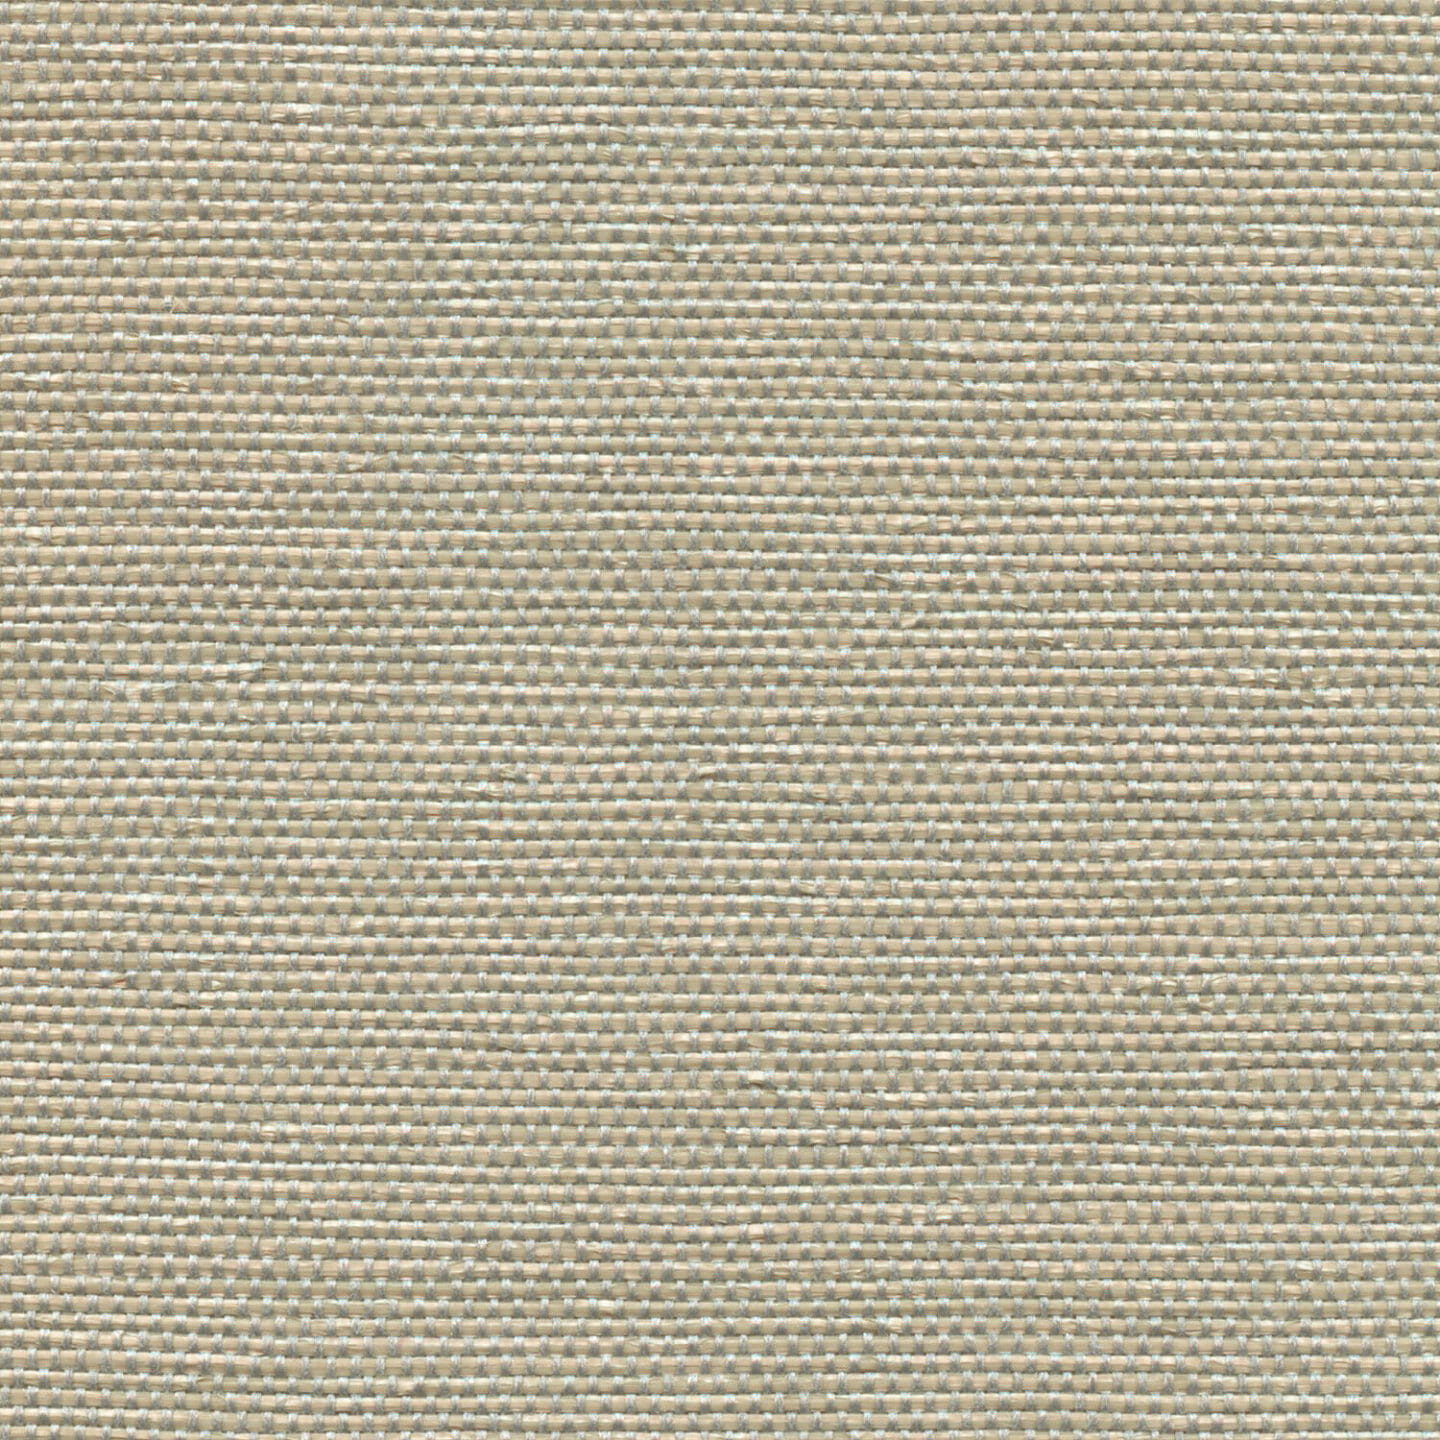 Studio 54® 2966: 66 Acoustic, Panel, & Upholstery Fabric Shimmer 7041